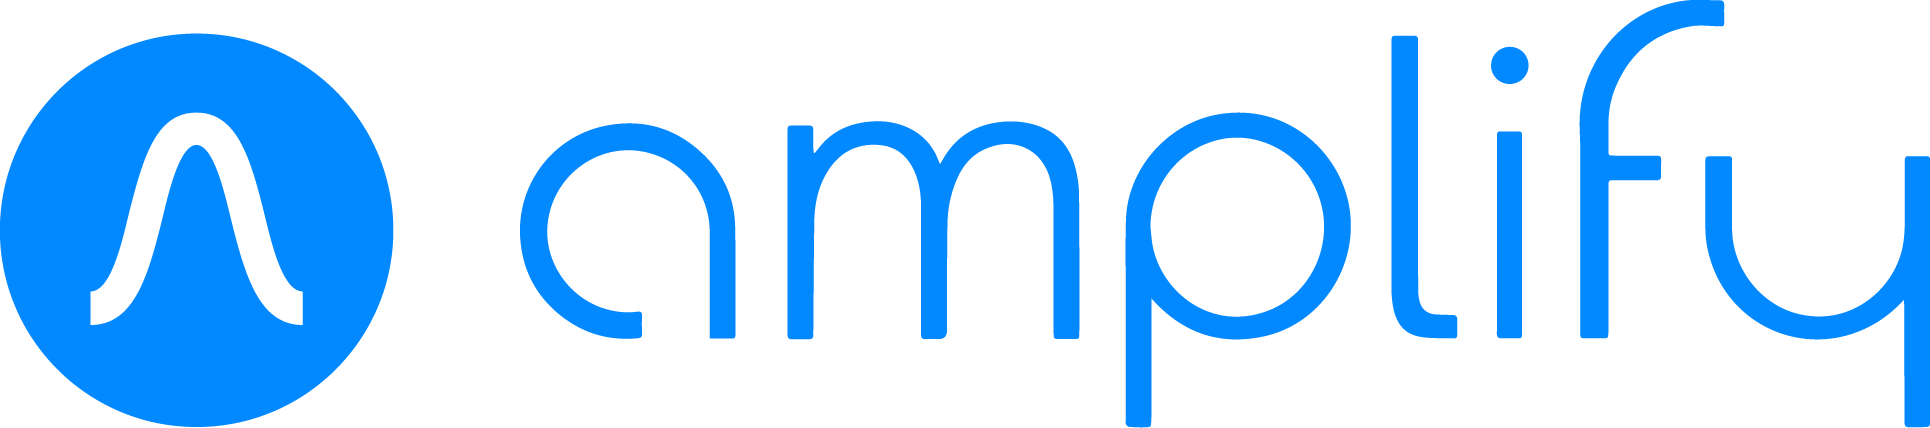 amplify-logo-primary-blue.png